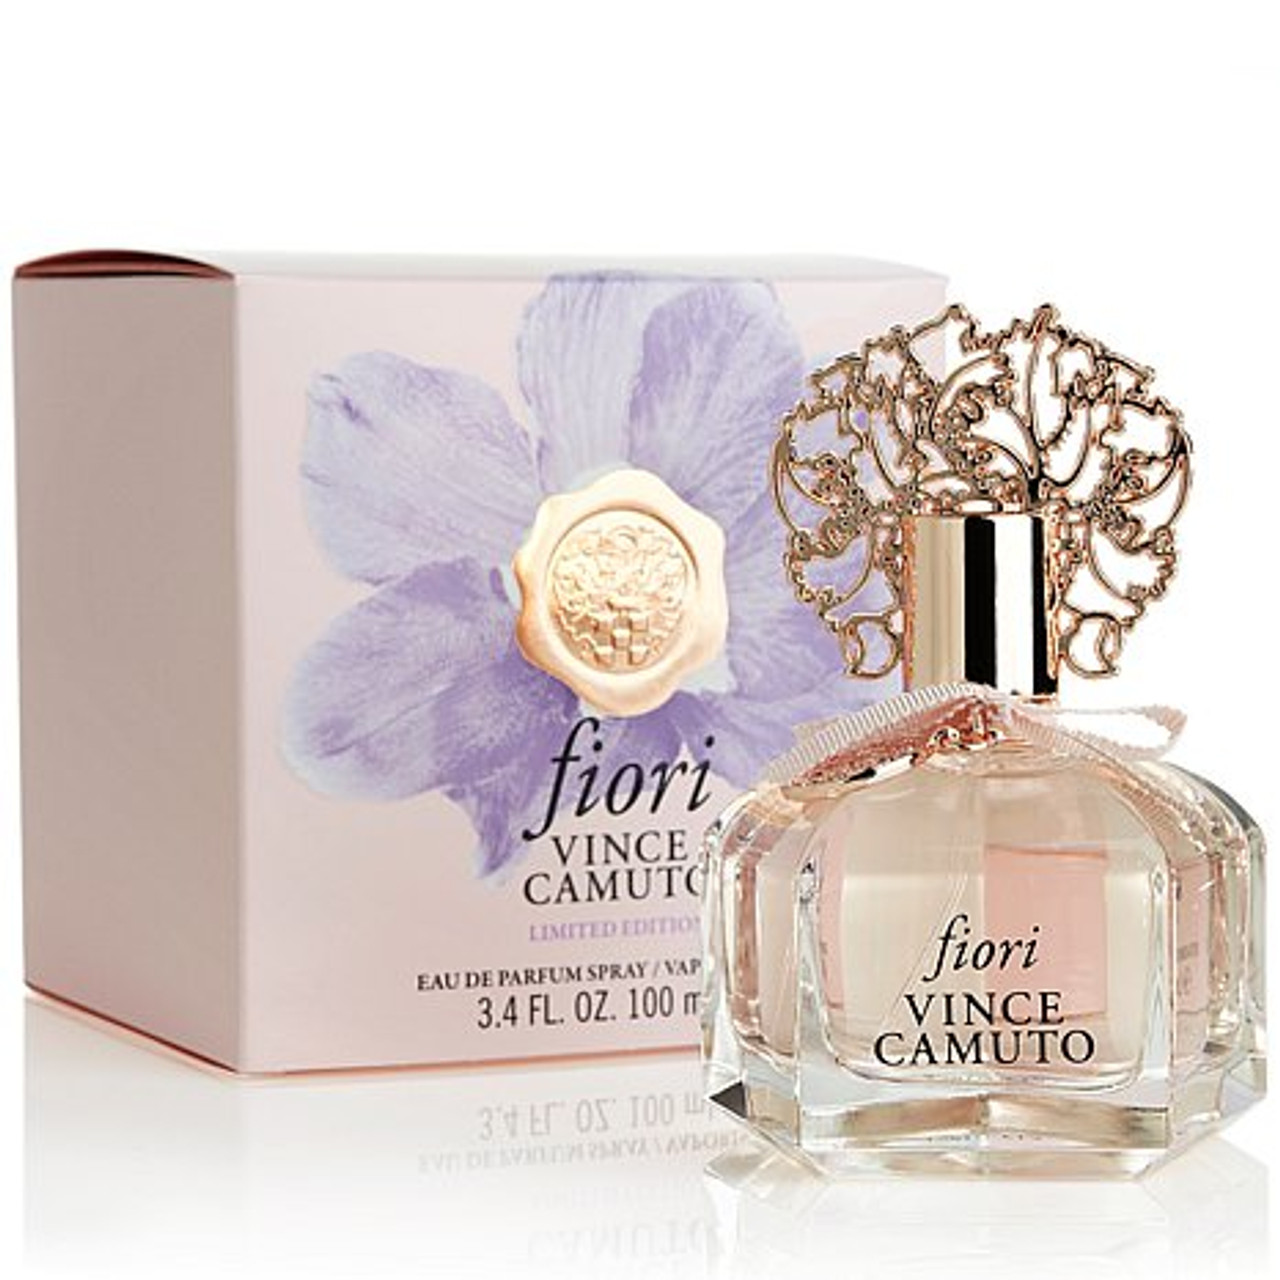 Vince Camuto Parfum 3.4 Oz by Vince Camuto For Women